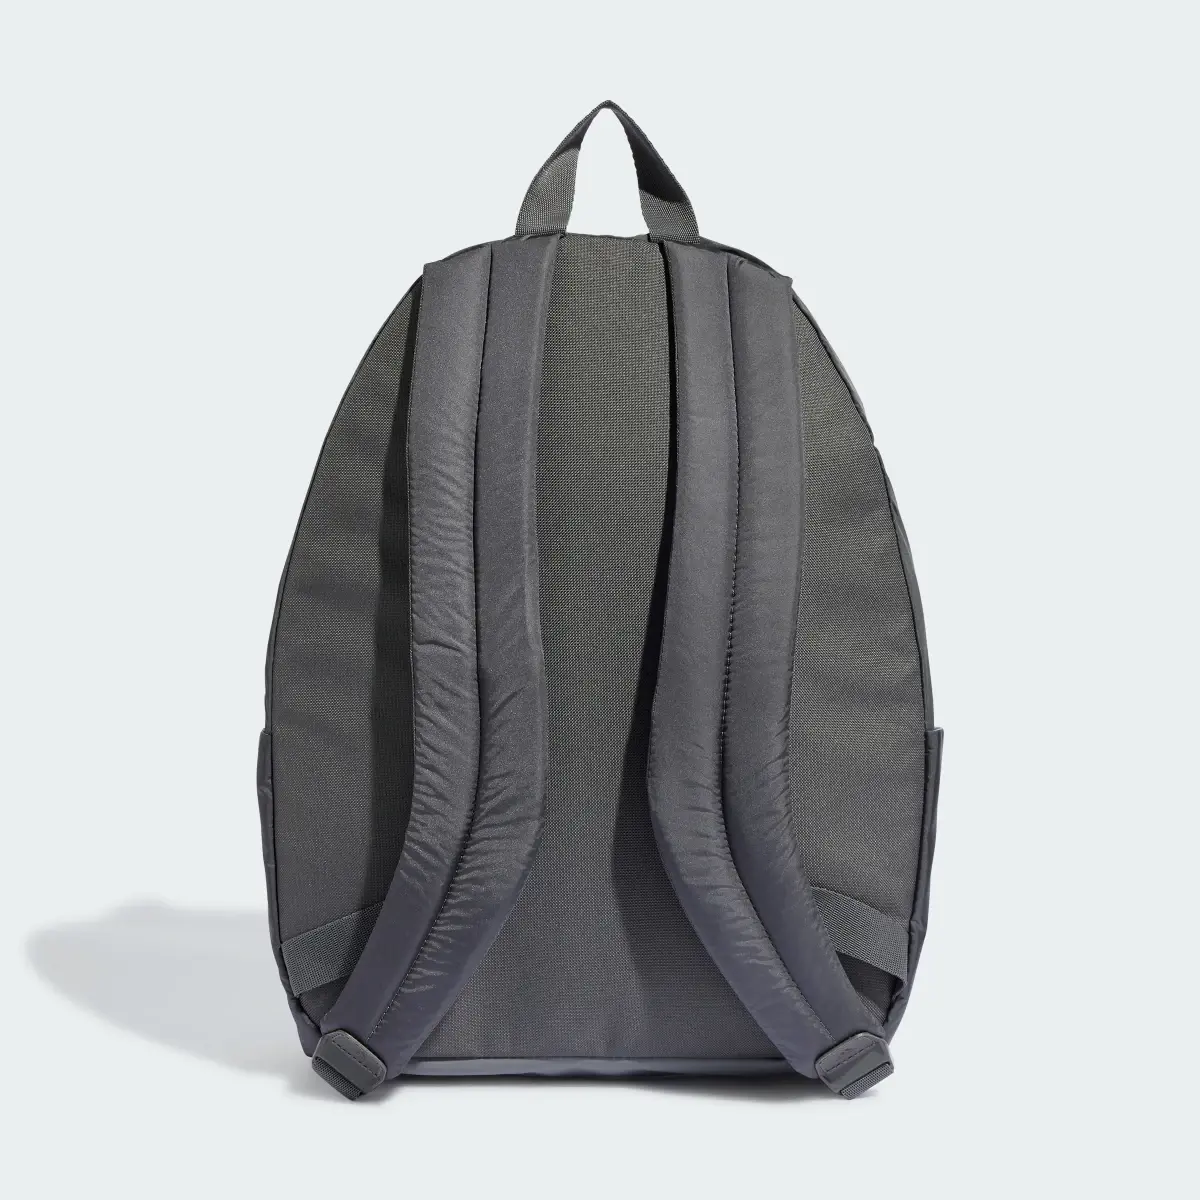 Adidas Classic Gen Z Backpack. 3